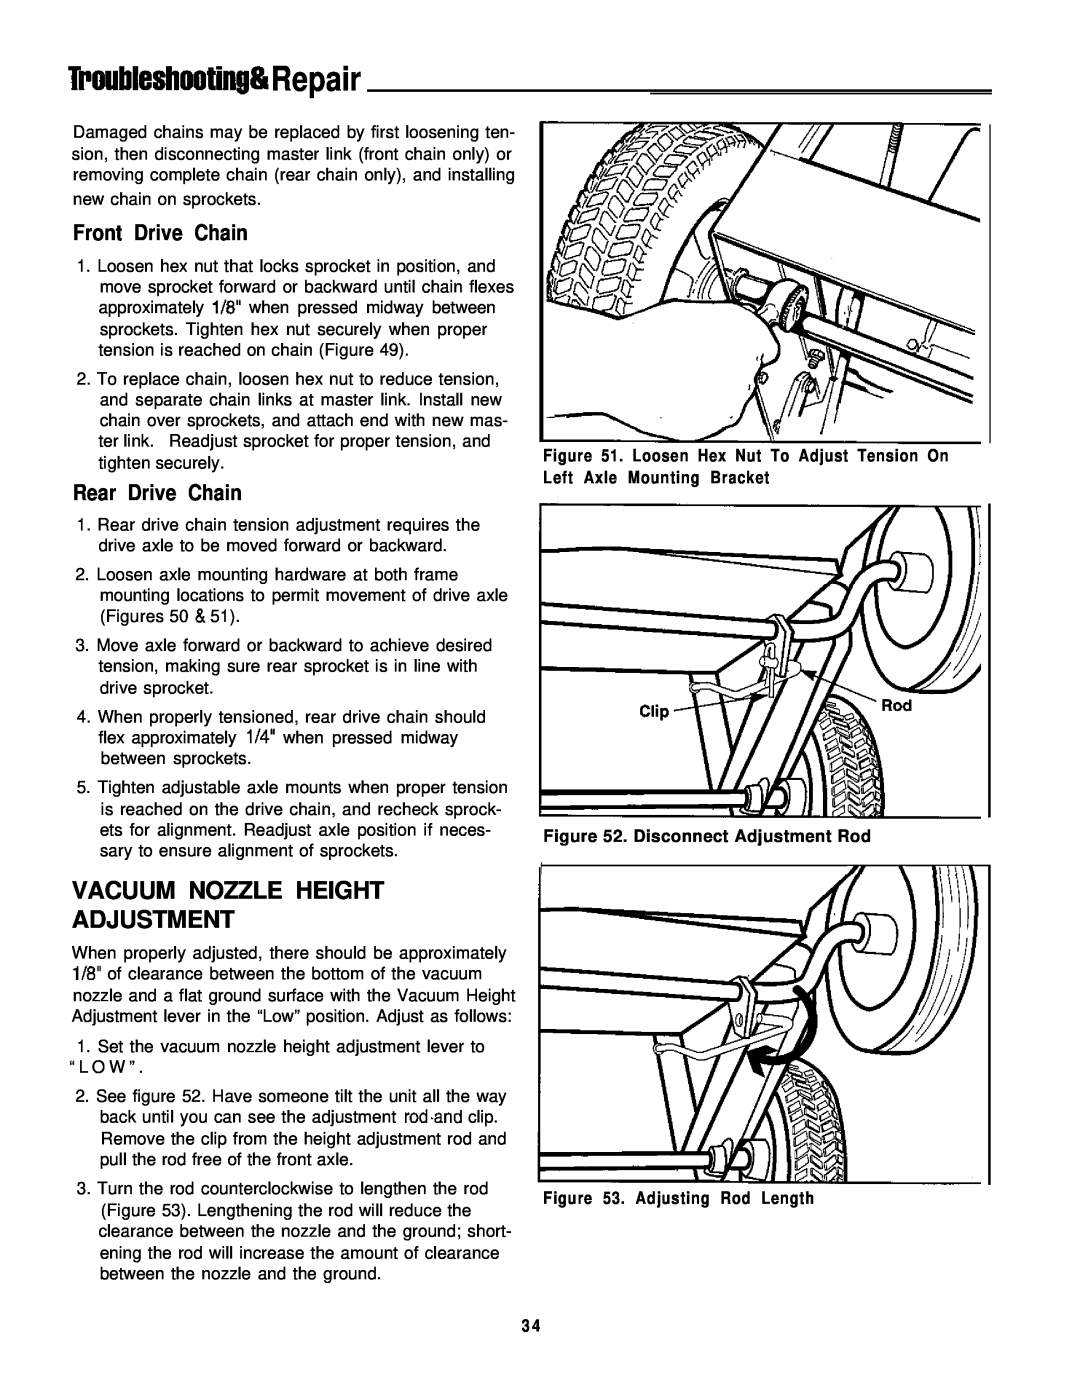 Simplicity 8/25, 6/25 manual Troubleshootin# #IRepair, Vacuum Nozzle Height Adjustment, Front Drive Chain, Rear Drive Chain 